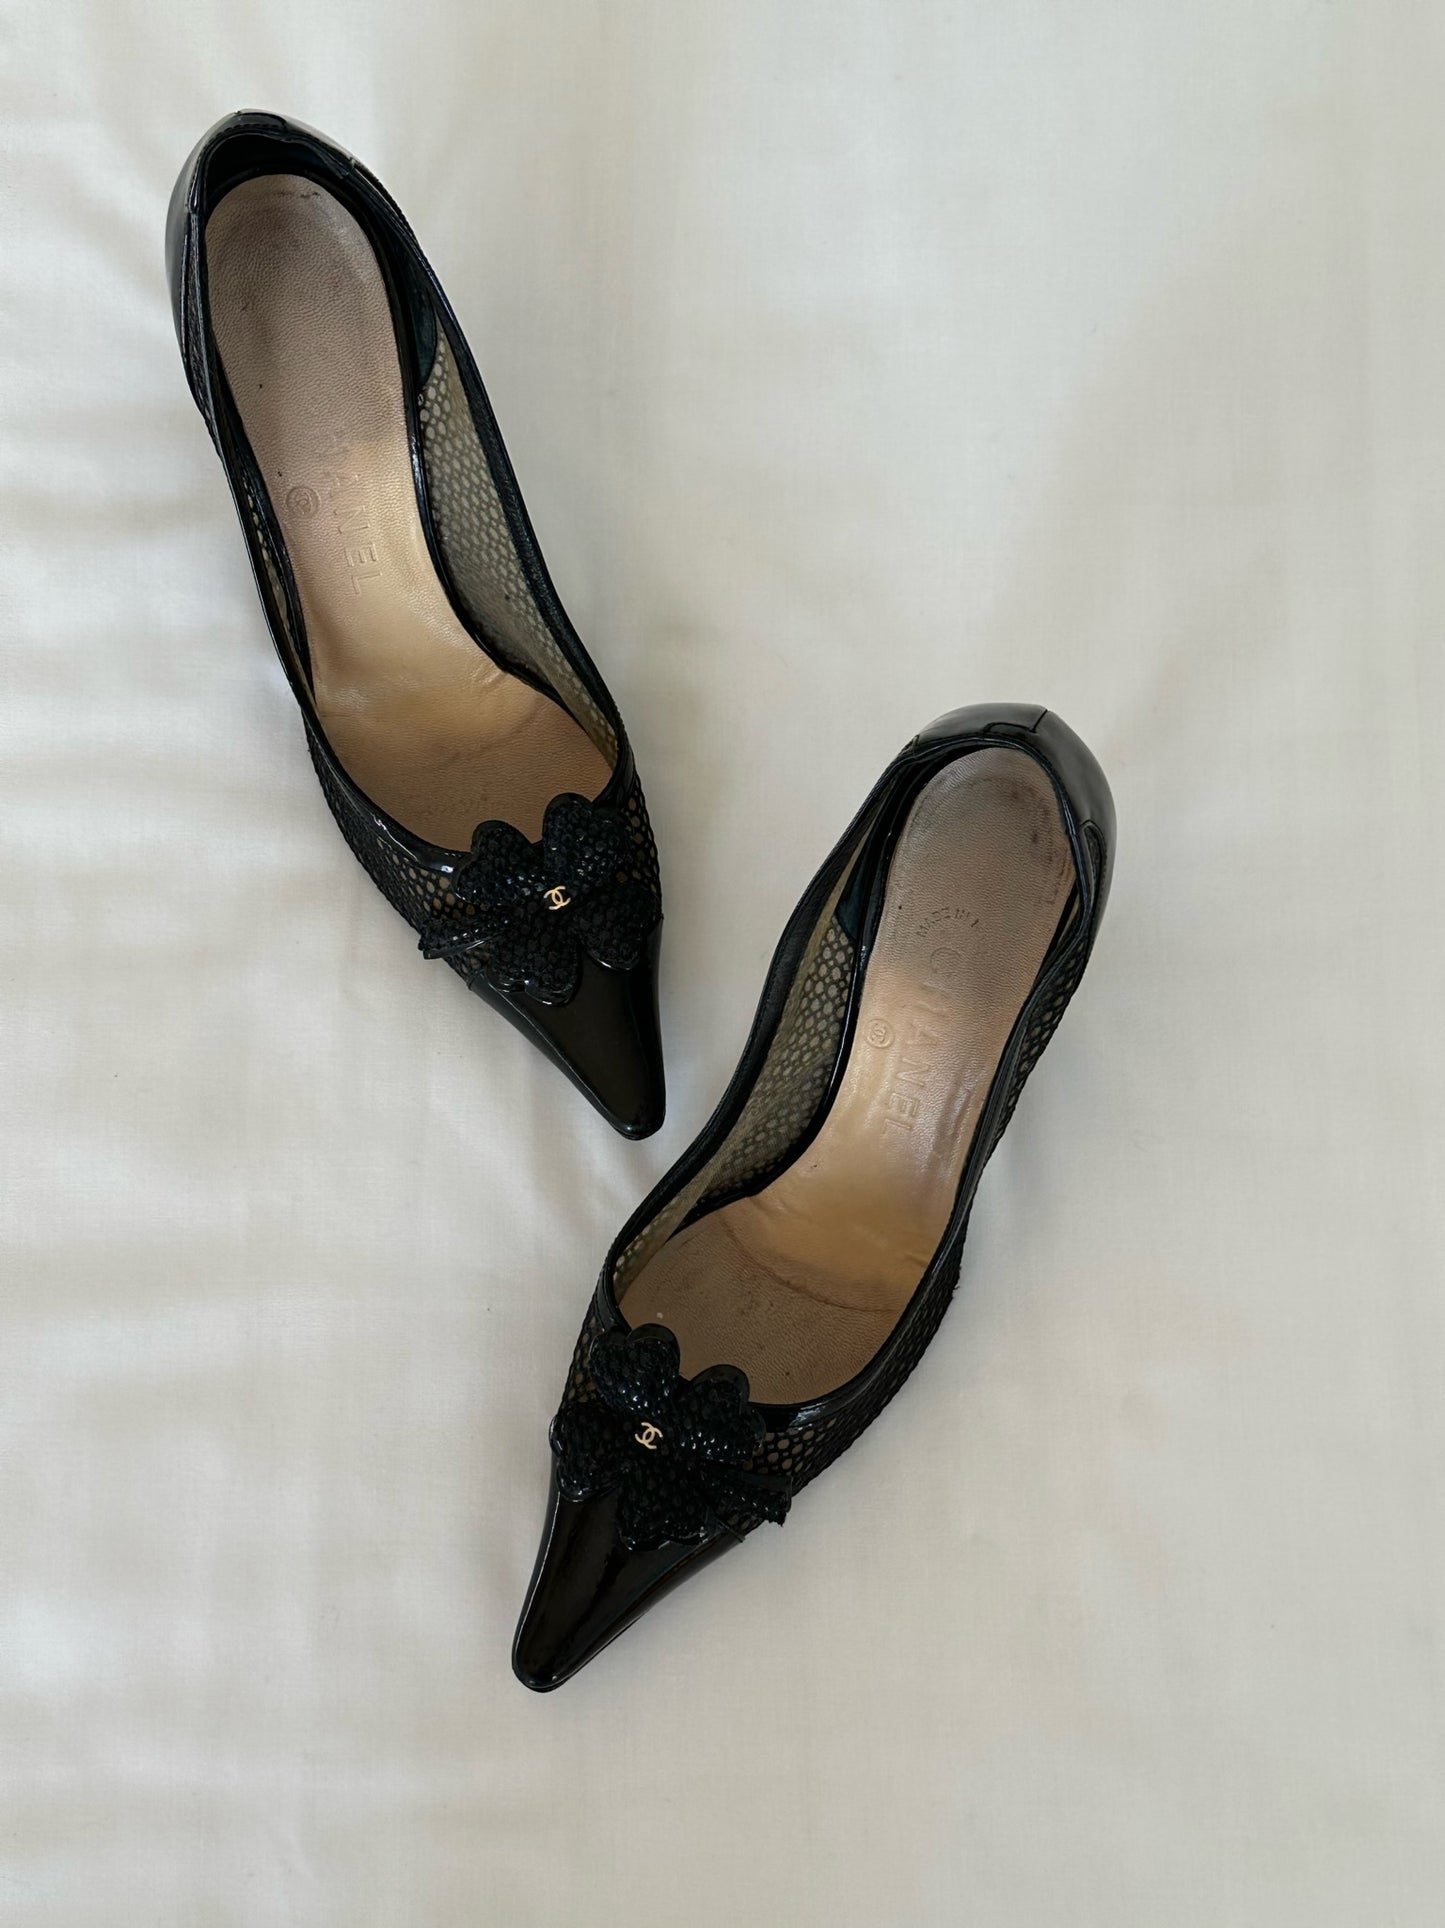 Chanel Iconic “CC” Lucky Four-Leaf Clover Kitten Heels